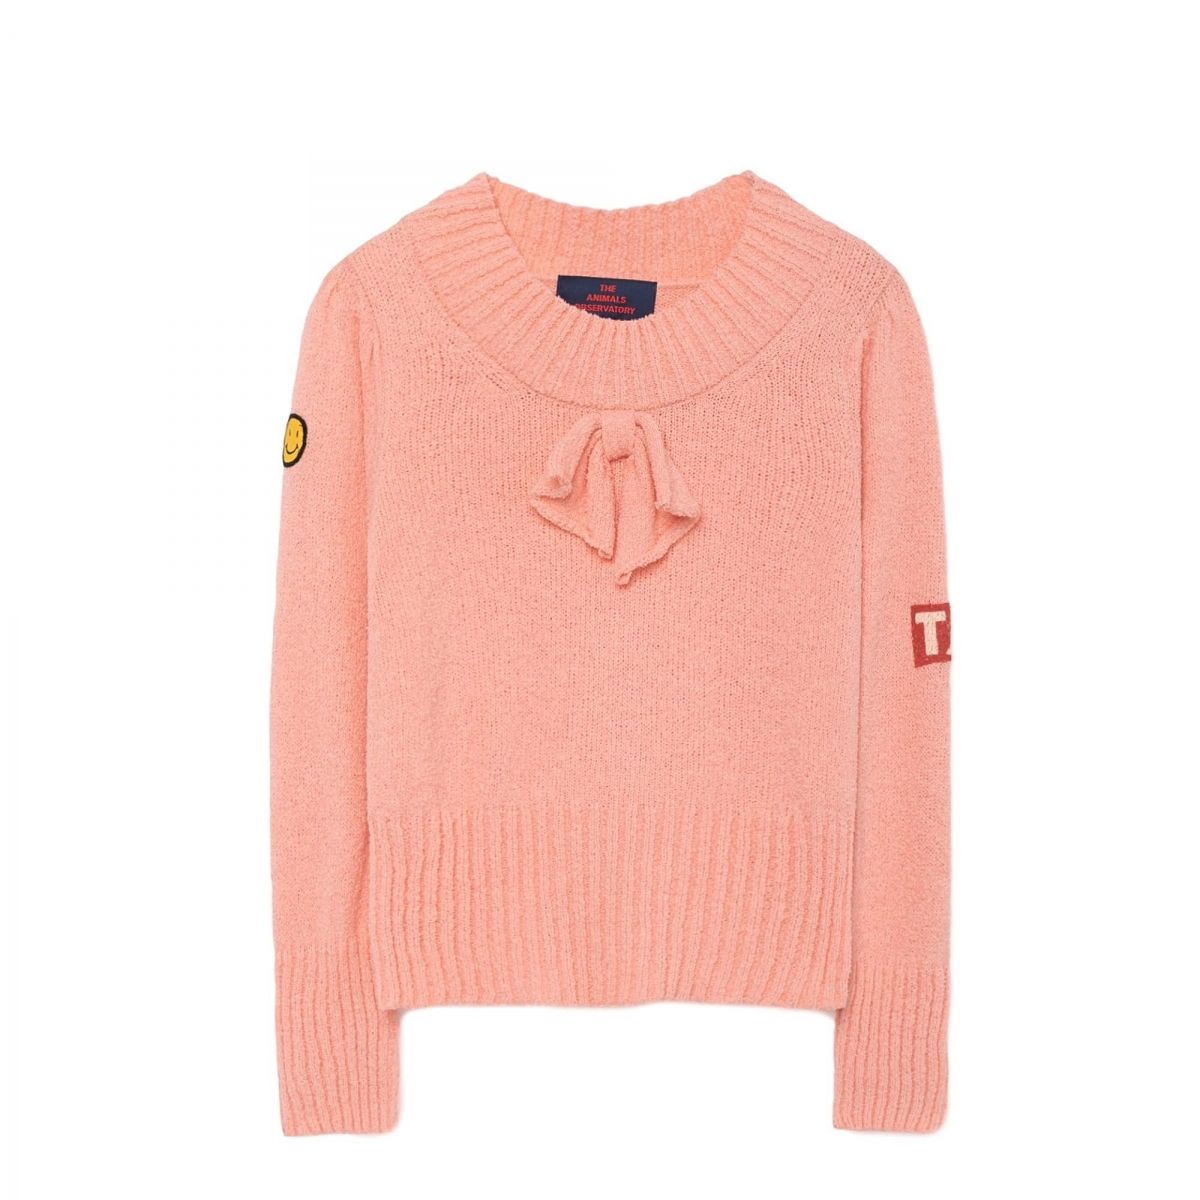 The Animals Observatory Horsefly Kids Sweater pink 000945 070_KG